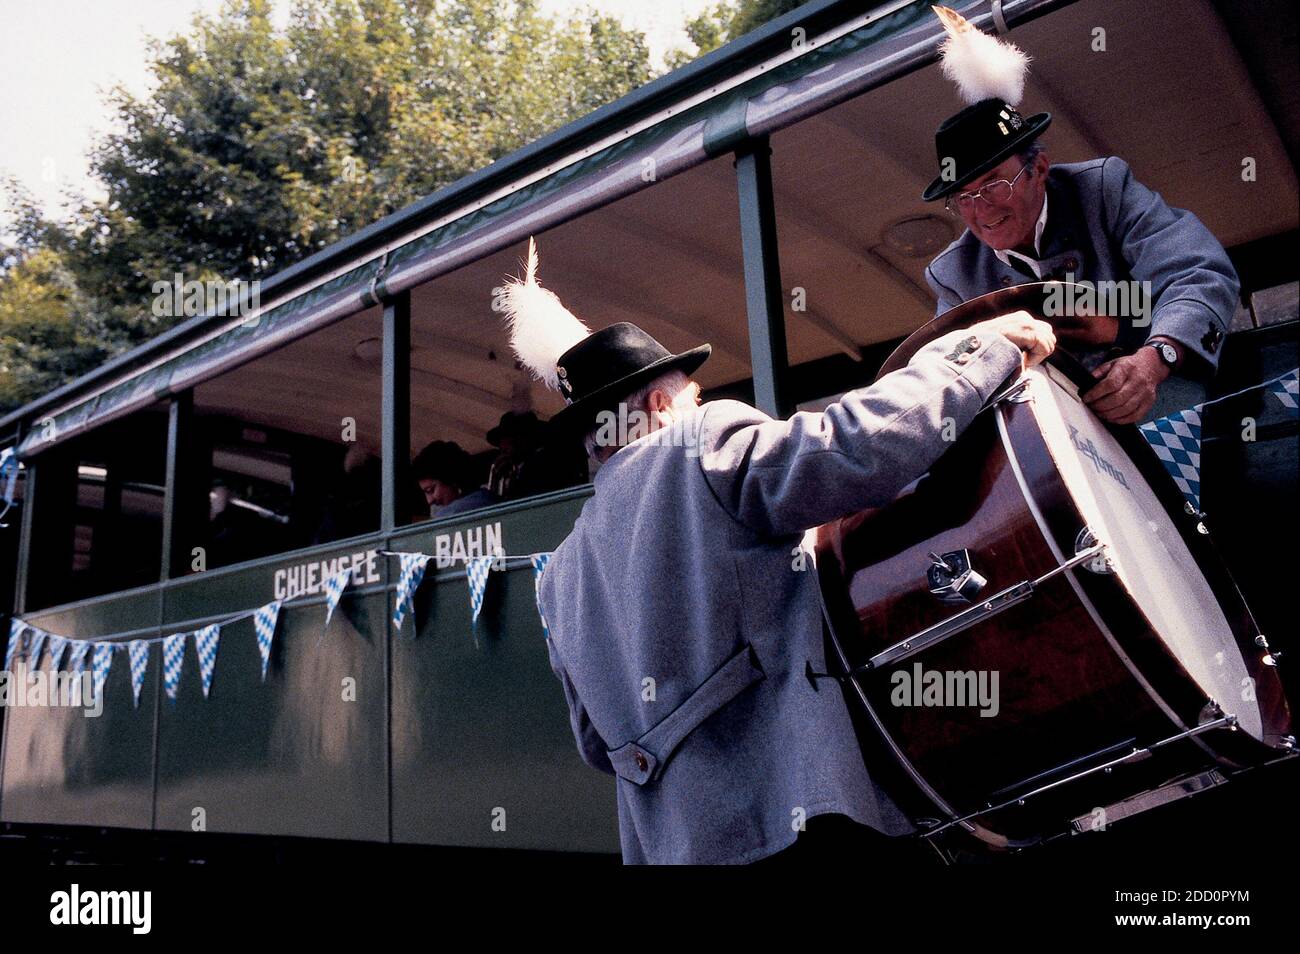 GERMANY / Bavaria / Chiemsee / Man in traditional clothes traveling on the train and his friend is helping to load his big Drum through the window. Stock Photo